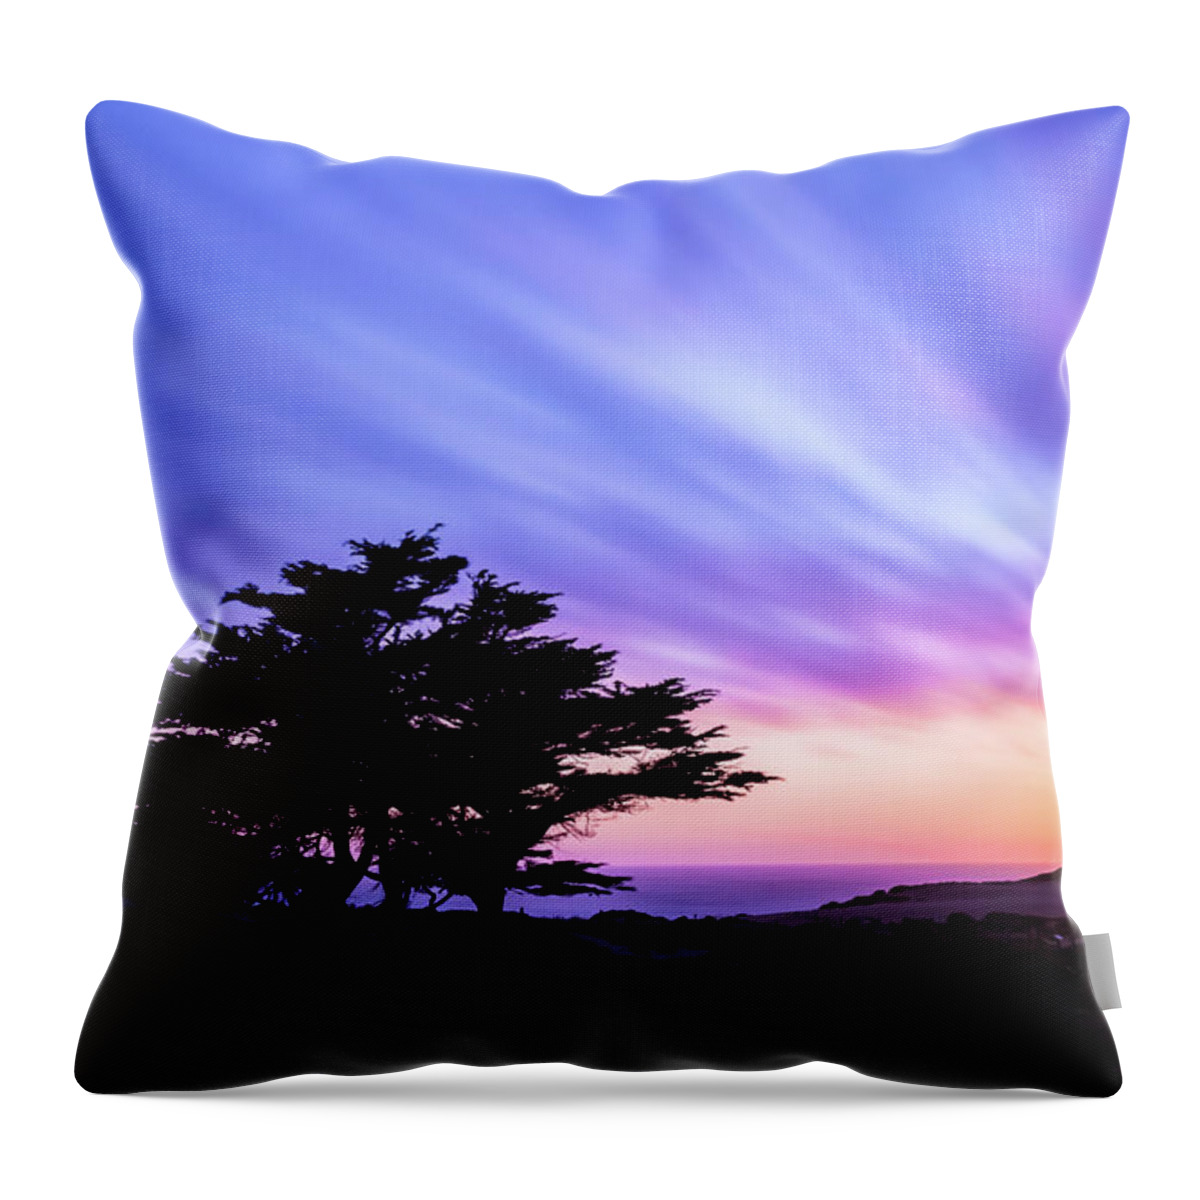 Landscape Throw Pillow featuring the photograph The Unexpected by Jonathan Nguyen